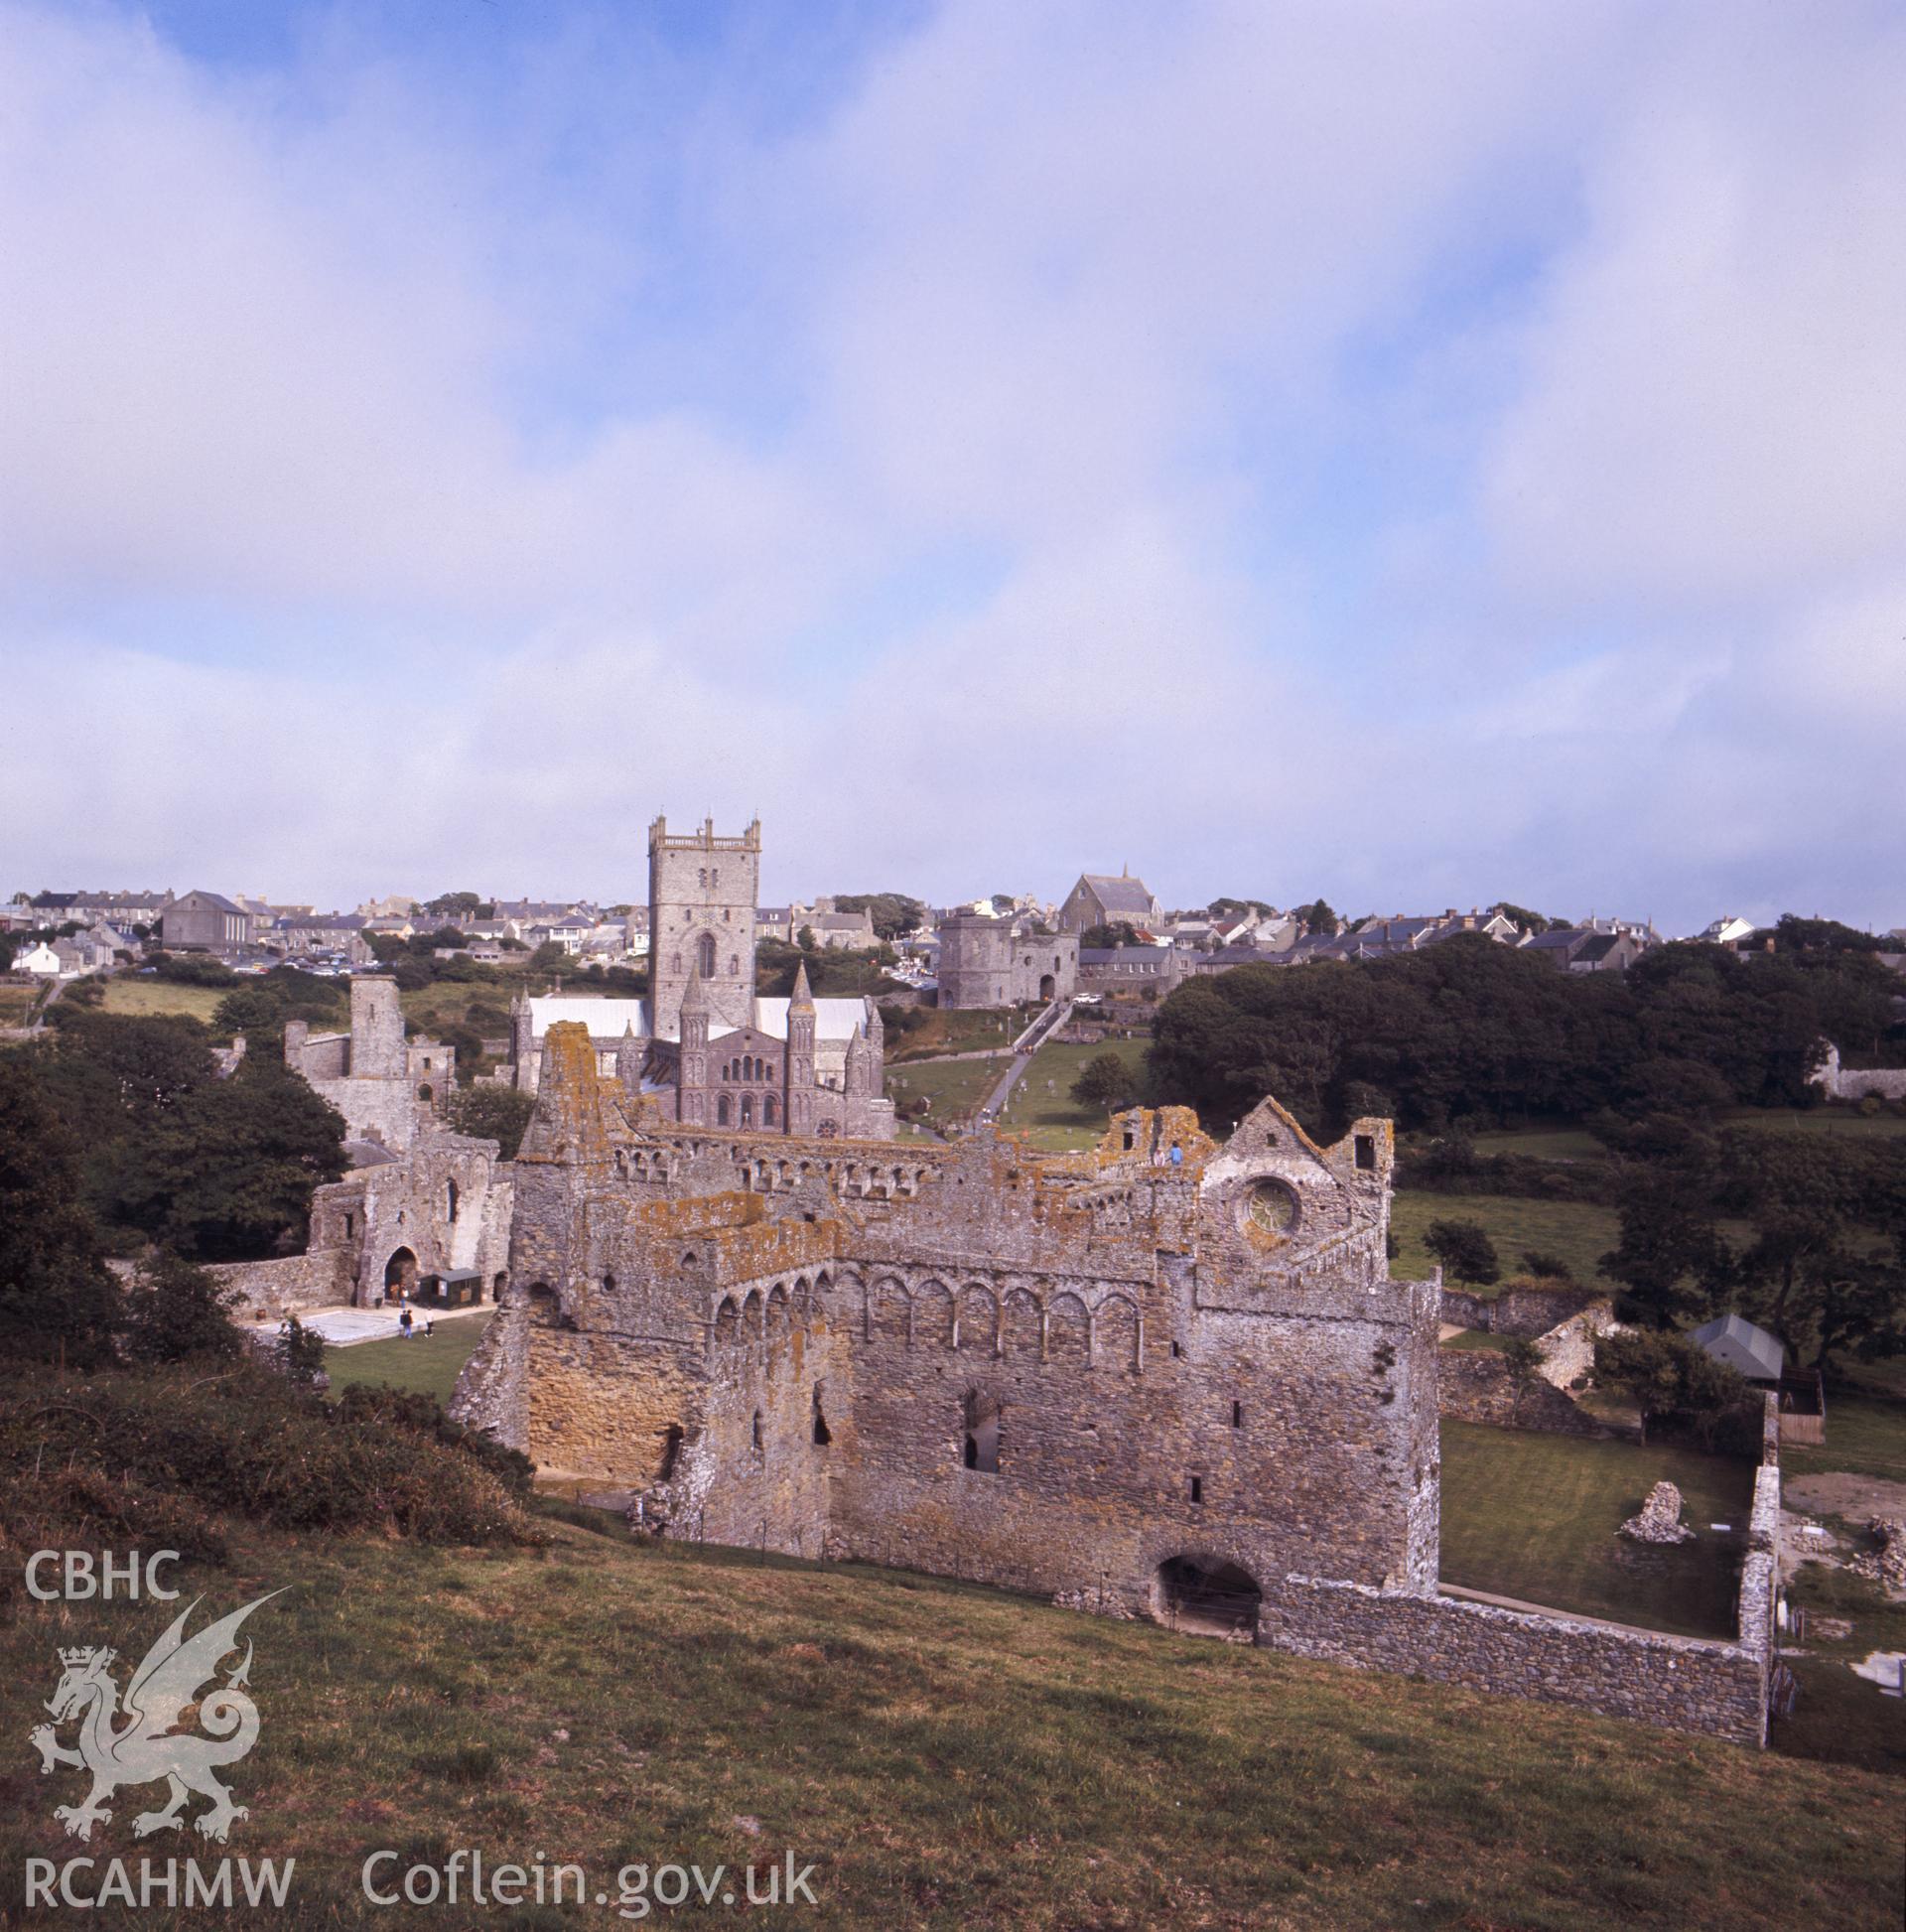 1 colour transparency showing view of Bishop's Palace, St Davids, undated; collated by the former Central Office of Information.